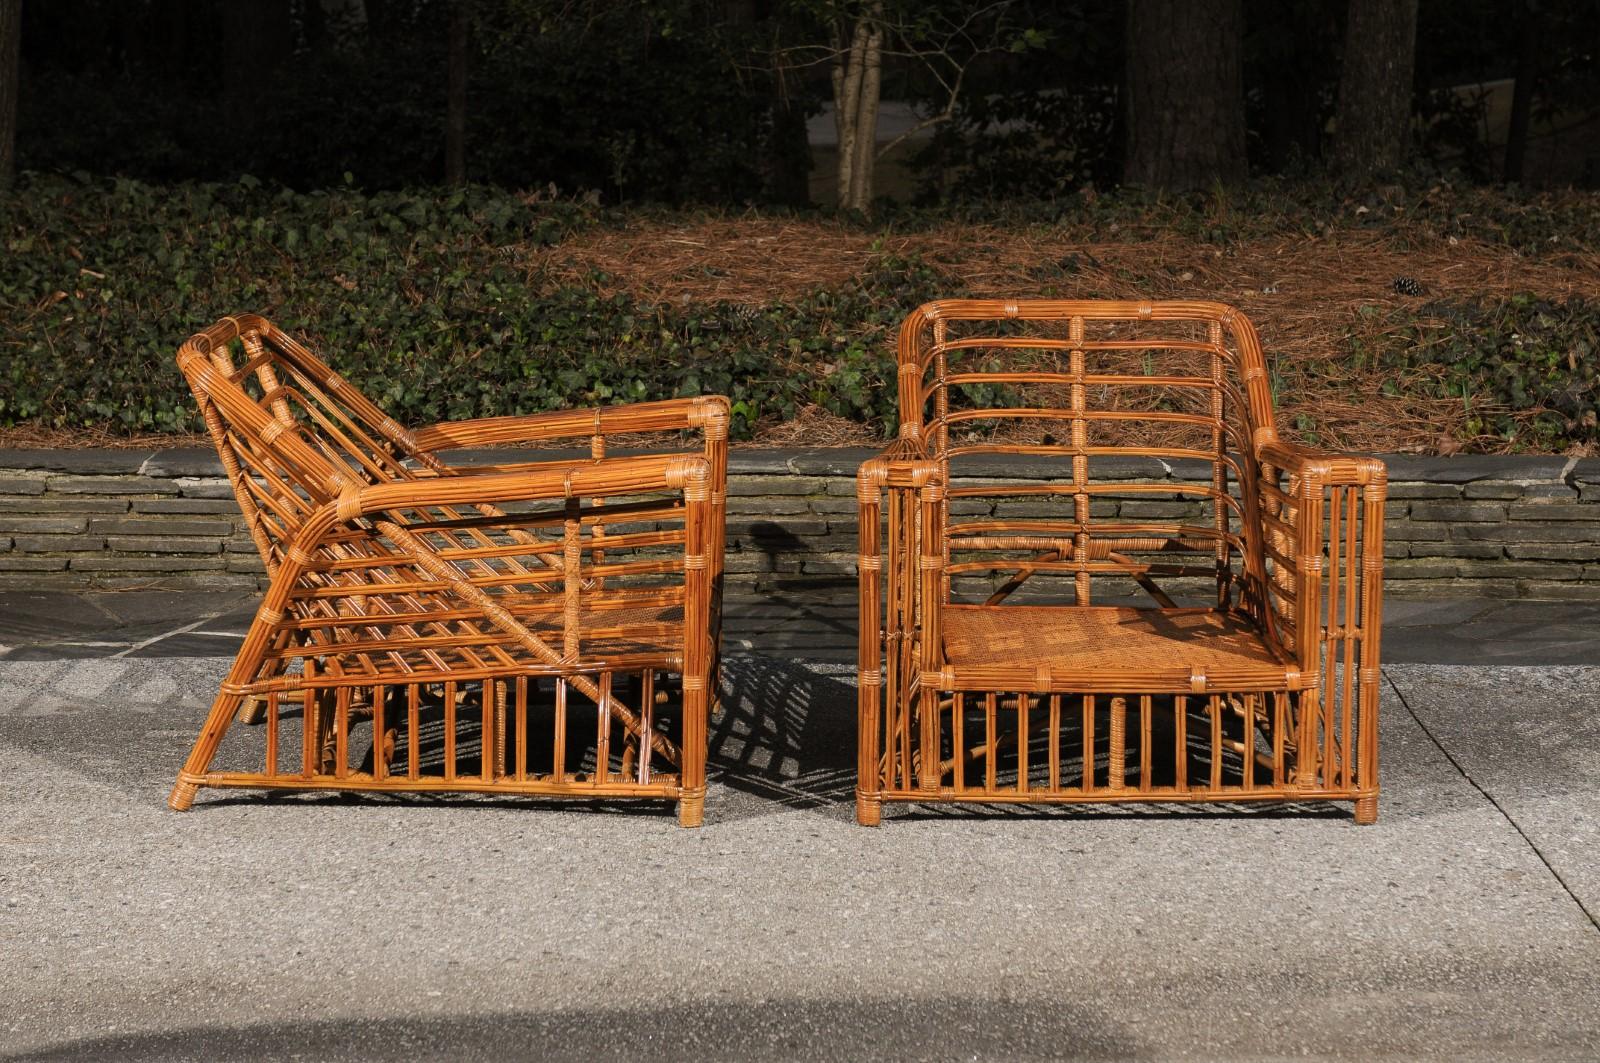 Exquisite Restored Pair of Modern President's Loungers by McGuire, circa 1985 For Sale 1